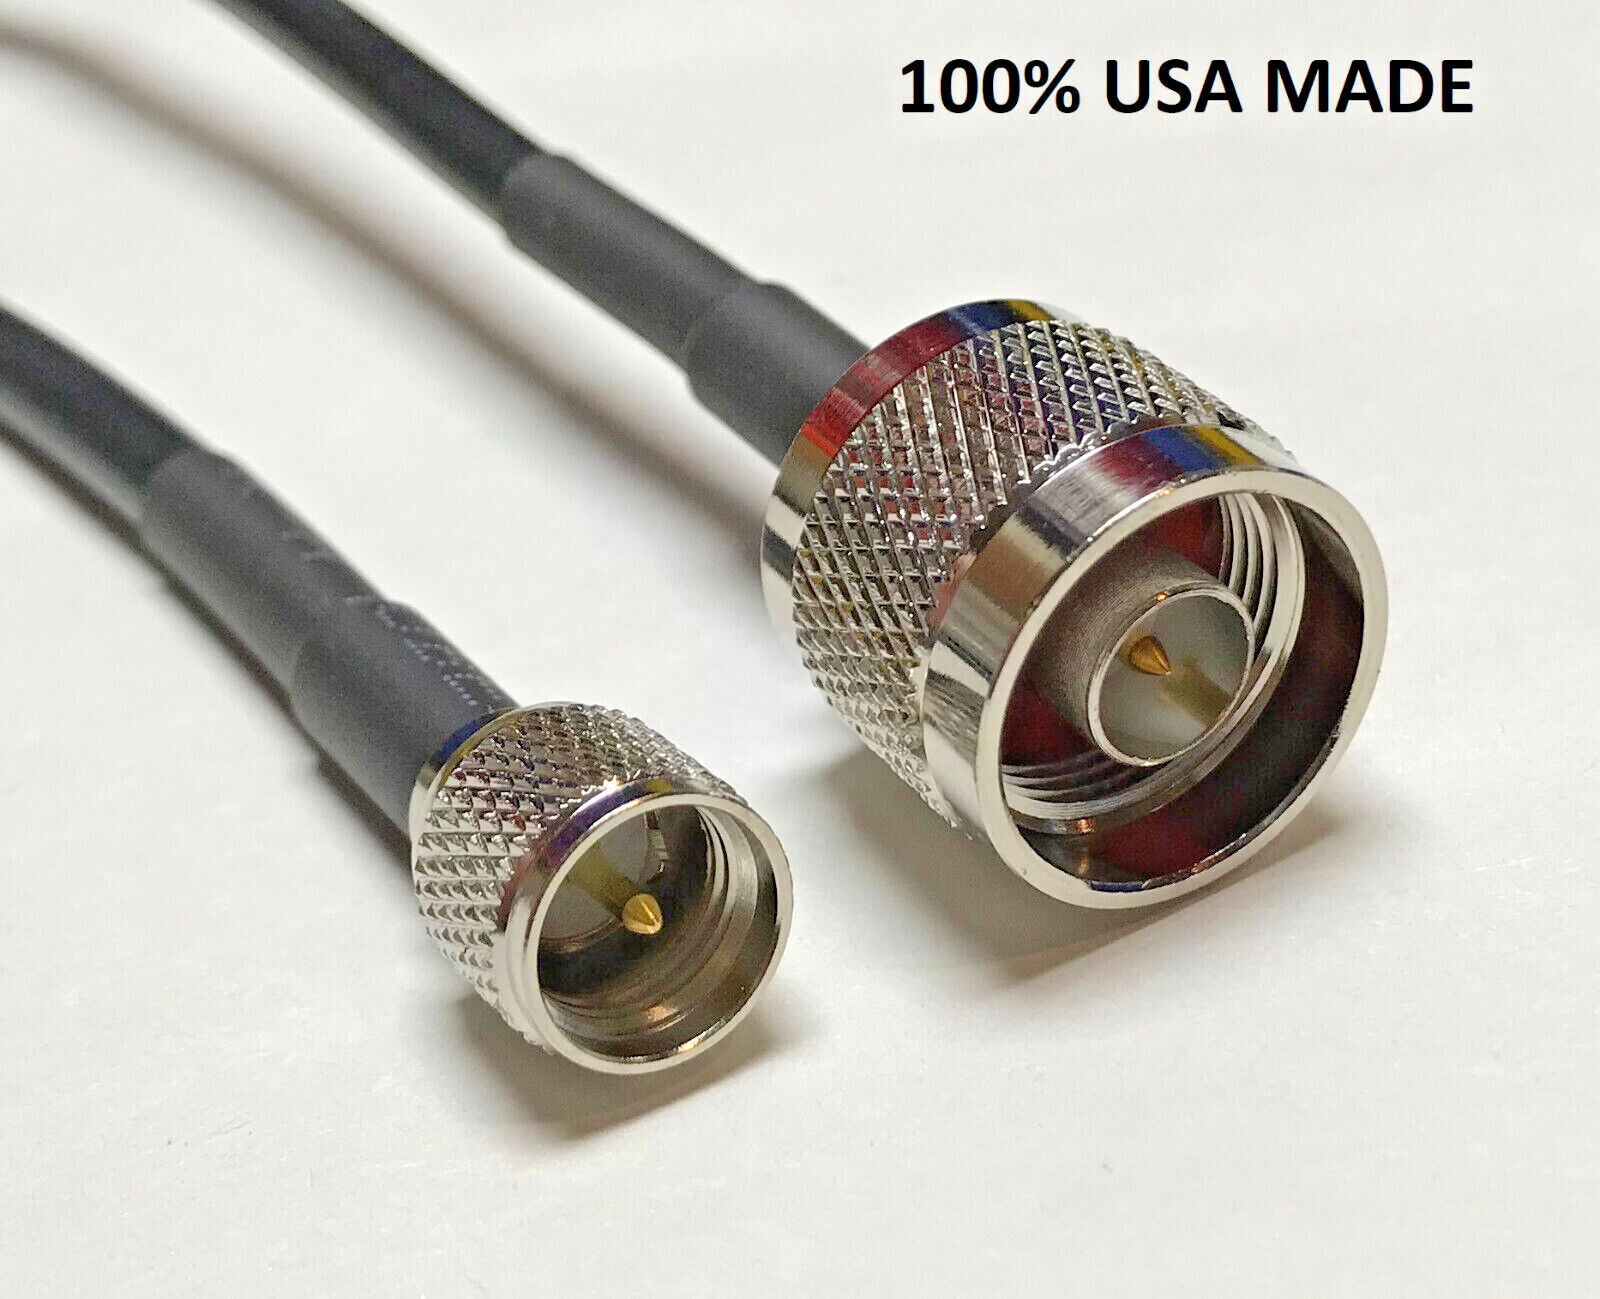 RG8X Mini UHF Male to N Male Coax RF Cable USA Fast Ship Lot. Available Now for $113.99